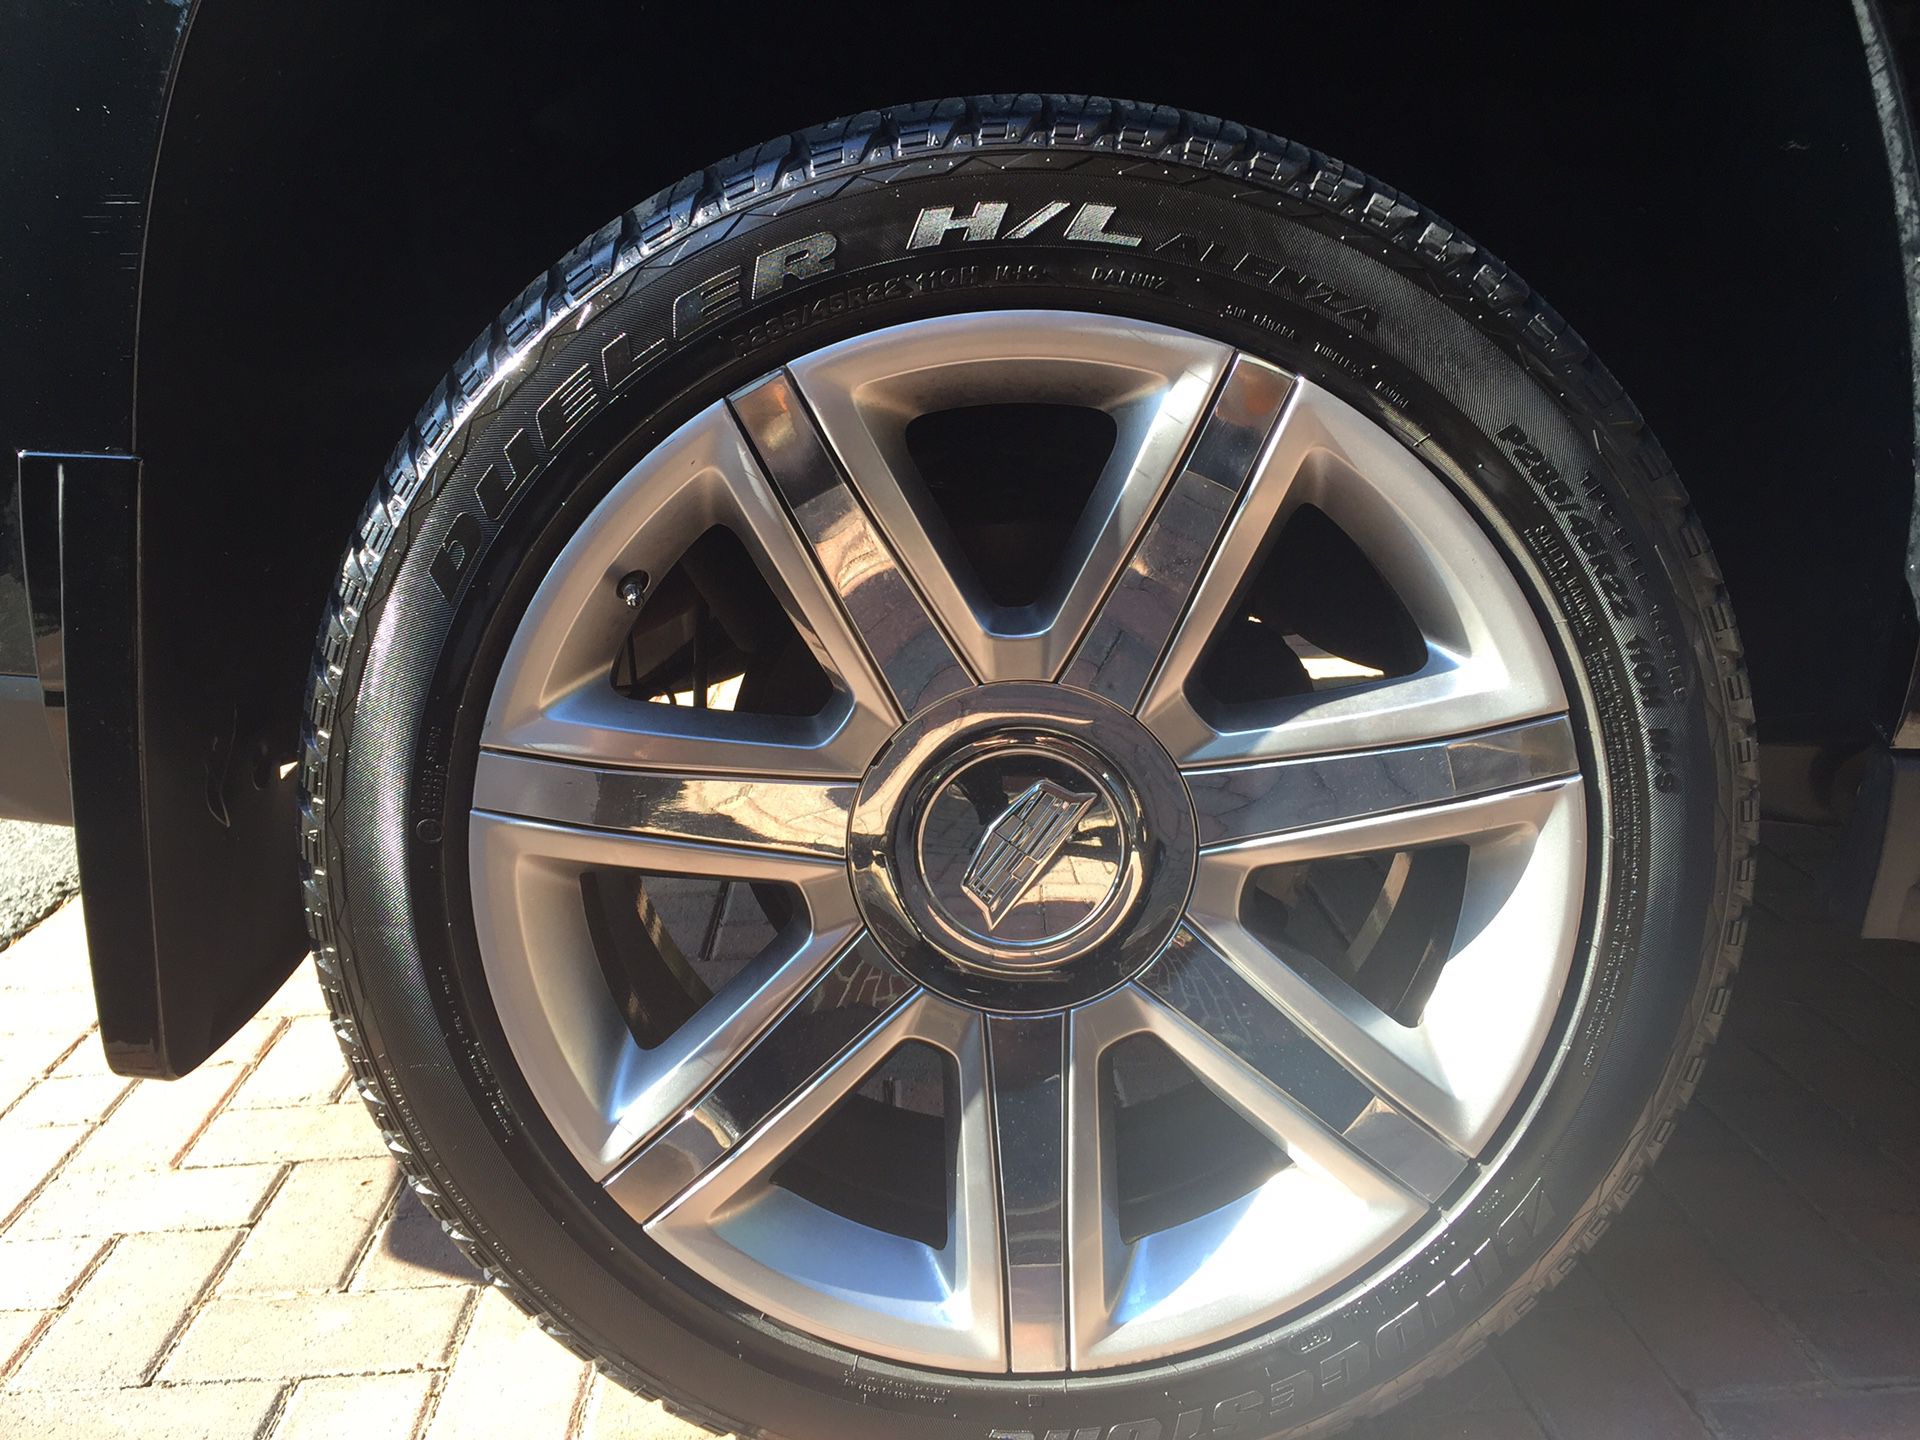 22 inch rims and tires of 2017 Cadillac Escalade OEM.